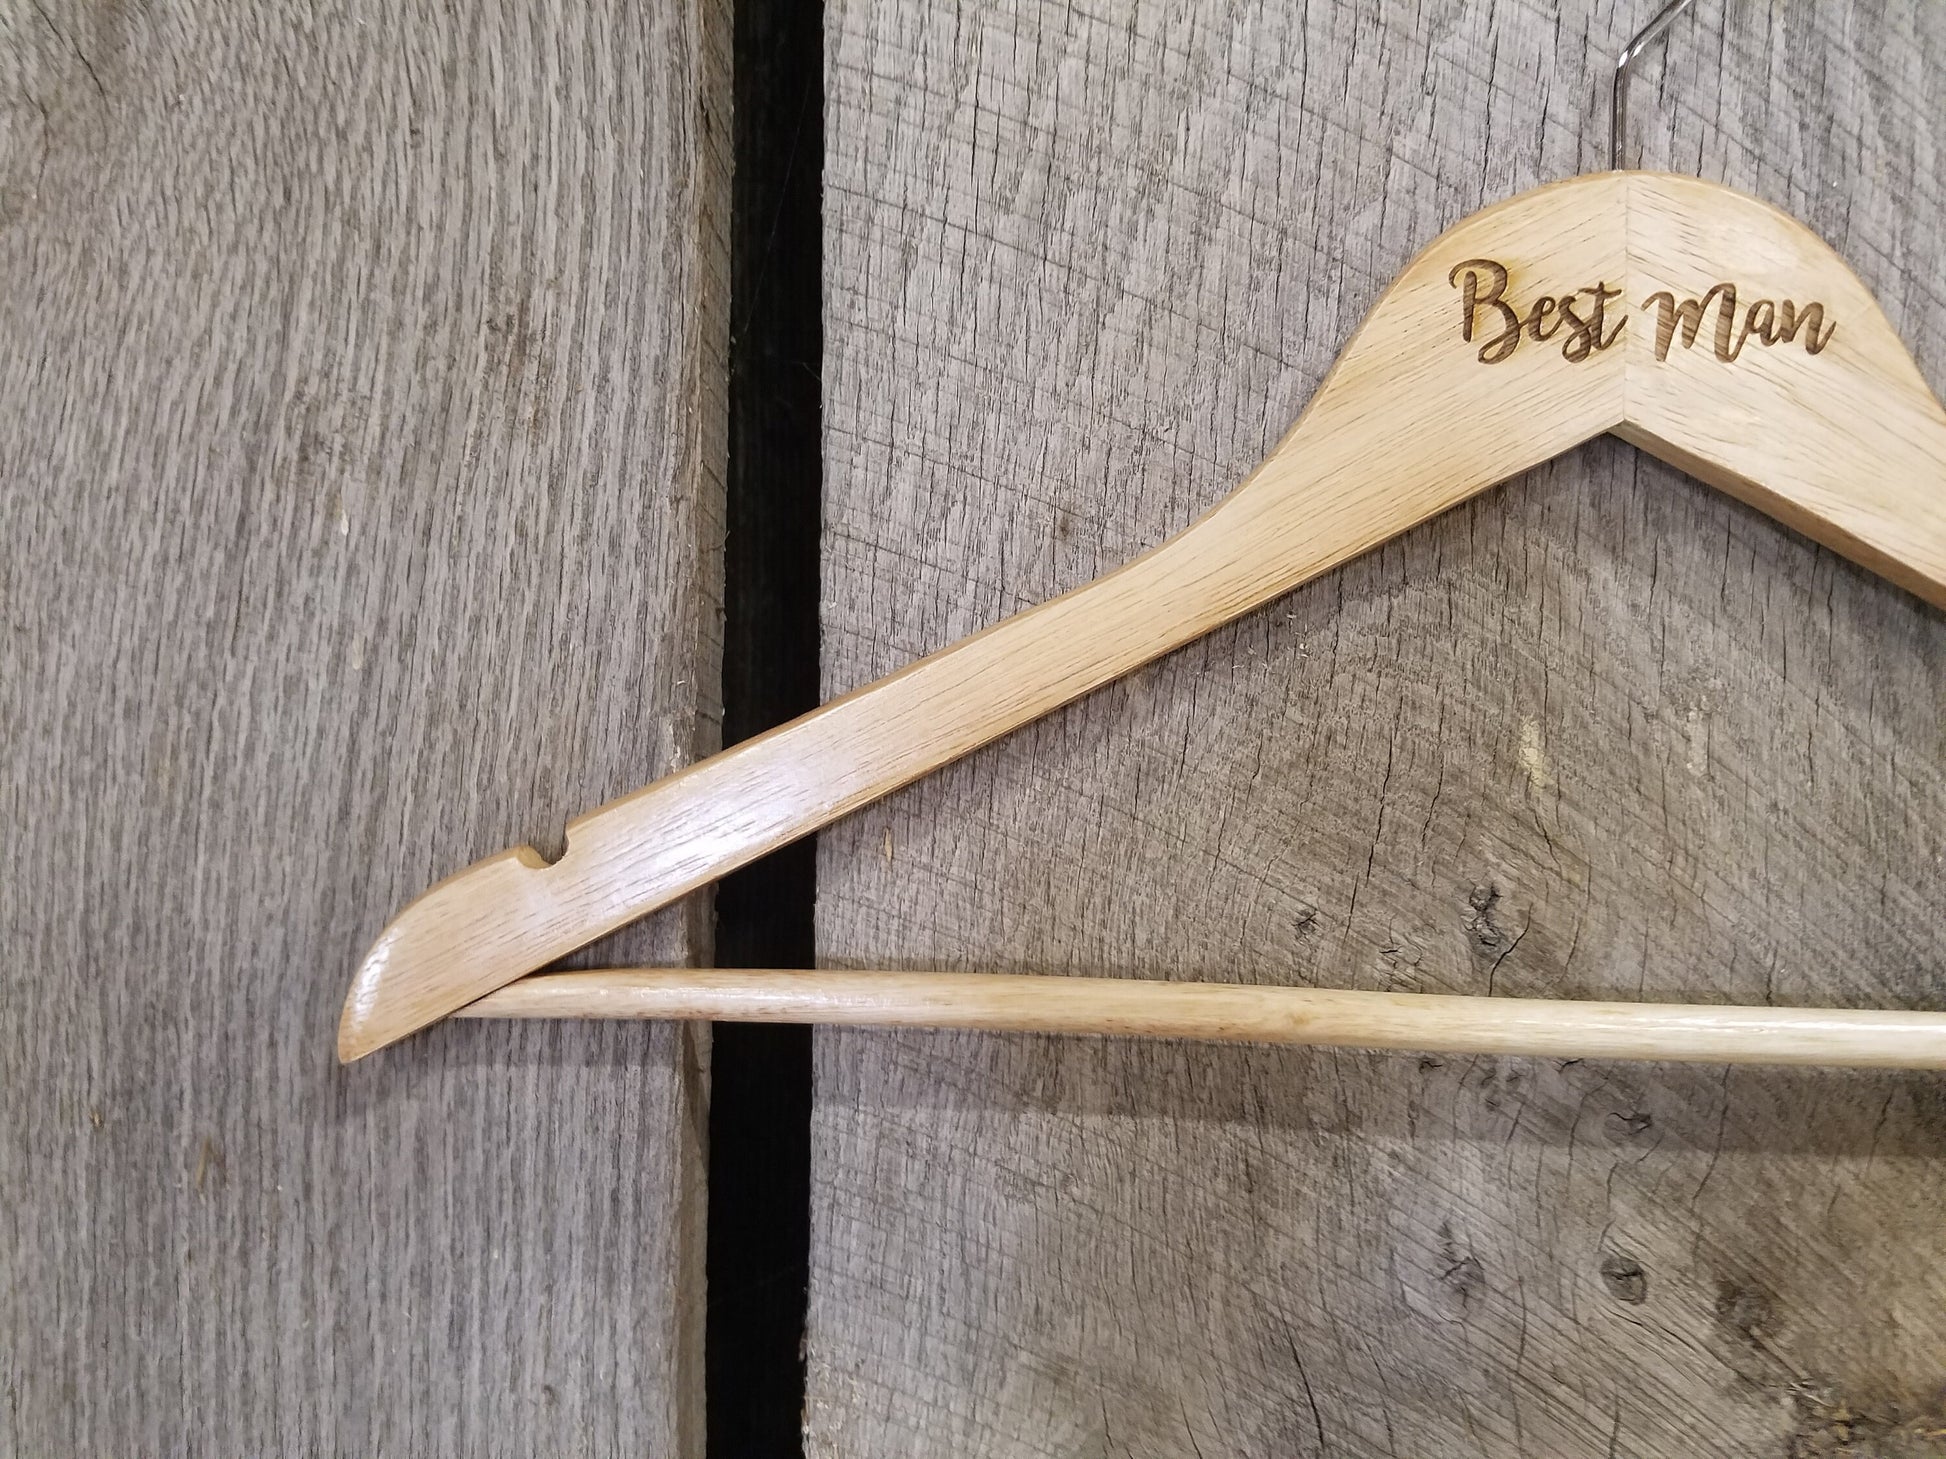 Best Man Suit Clothes Hanger Bridal Party Engraved Hard Wood Coat Sturdy Wedding Bromellow Personalized